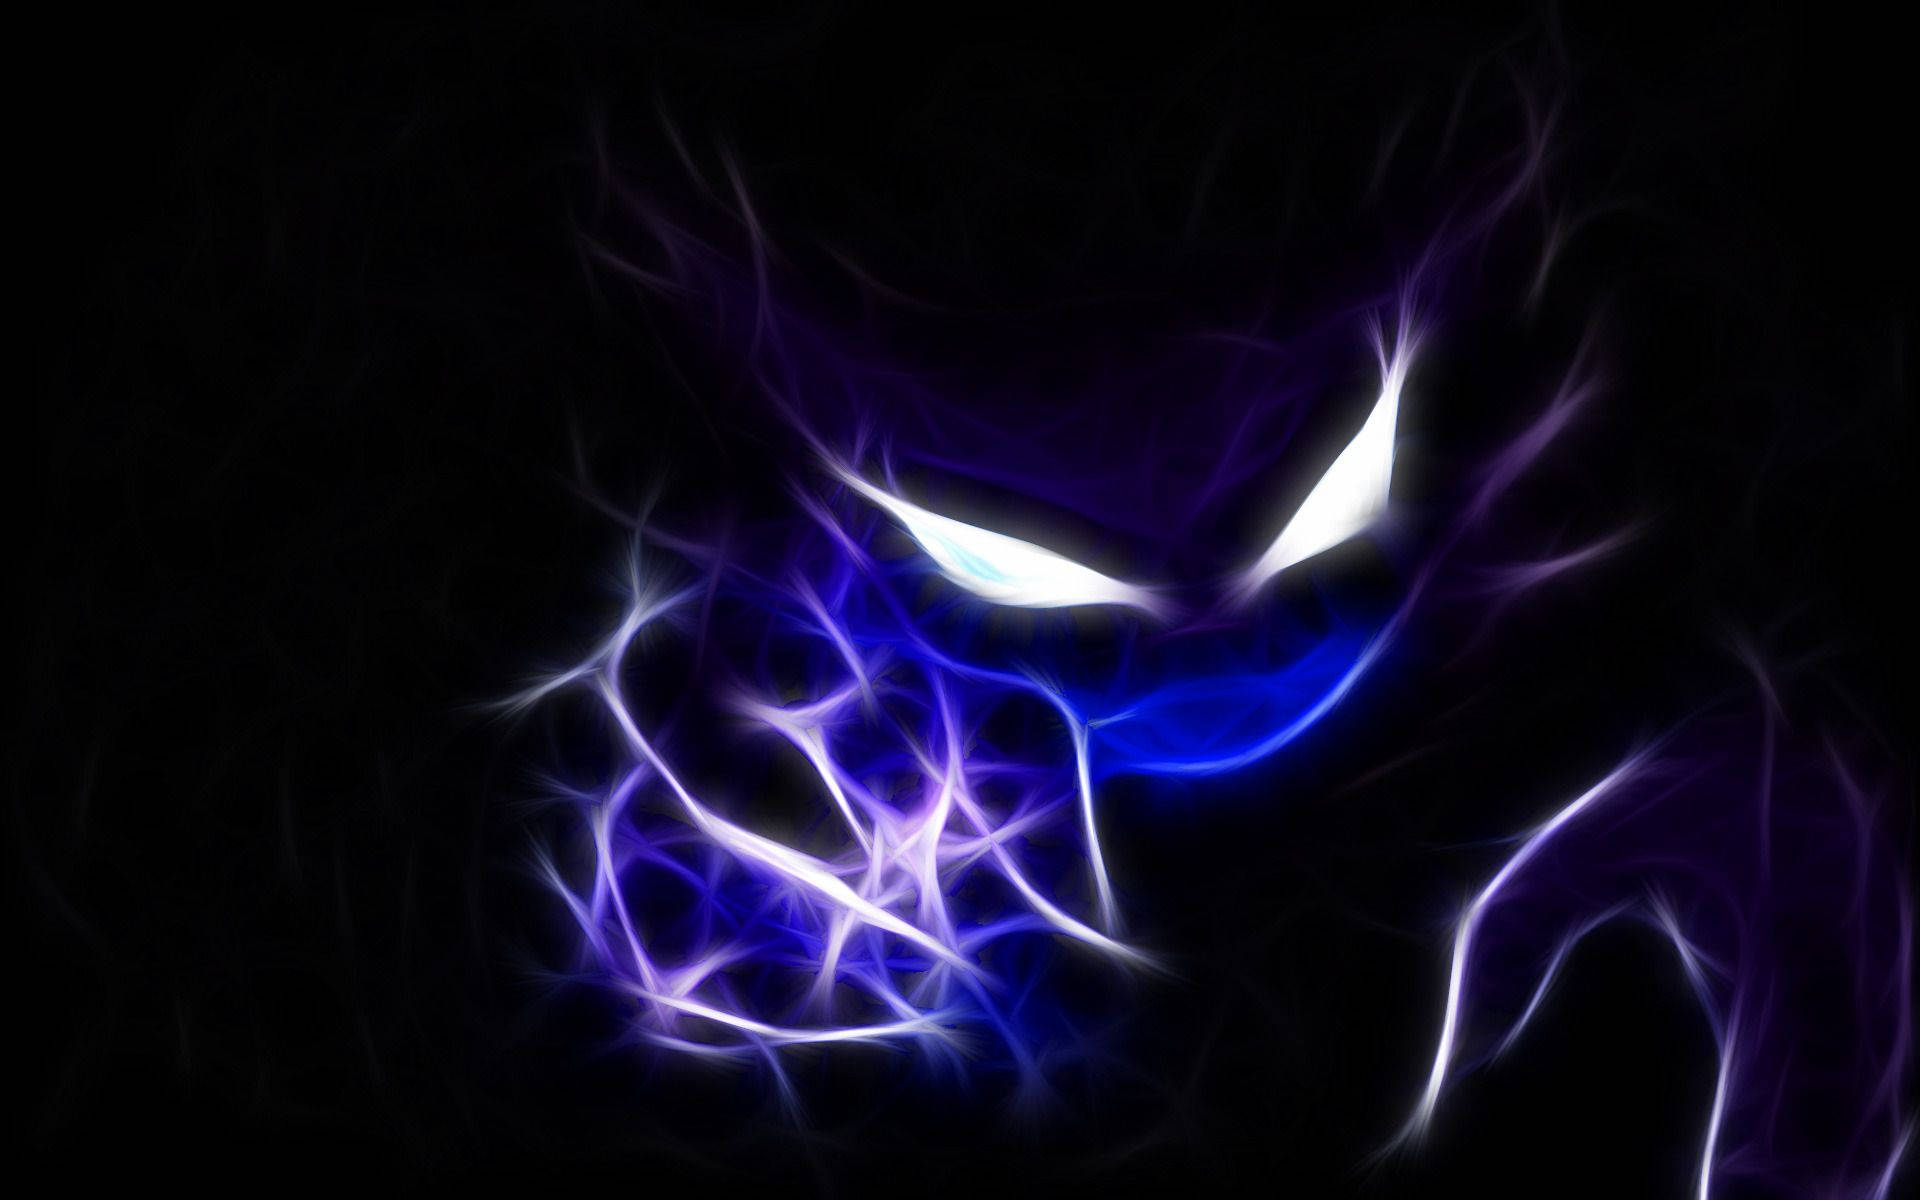 Get Cool with a Purple Ghost Wallpaper